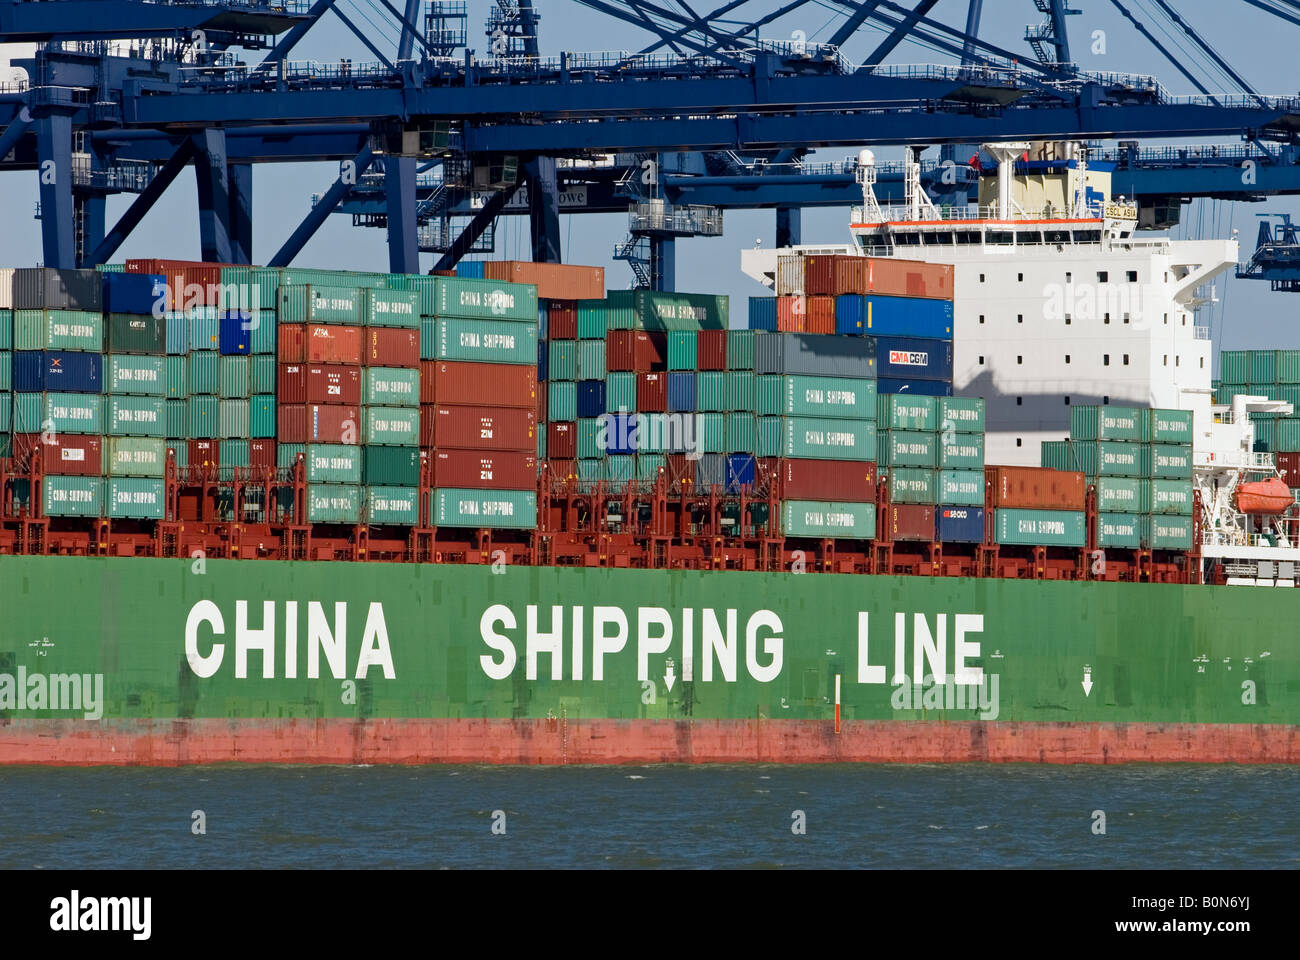 'CSCL Asia' container ship at the Port of Felixstowe, Suffolk, UK. Stock Photo